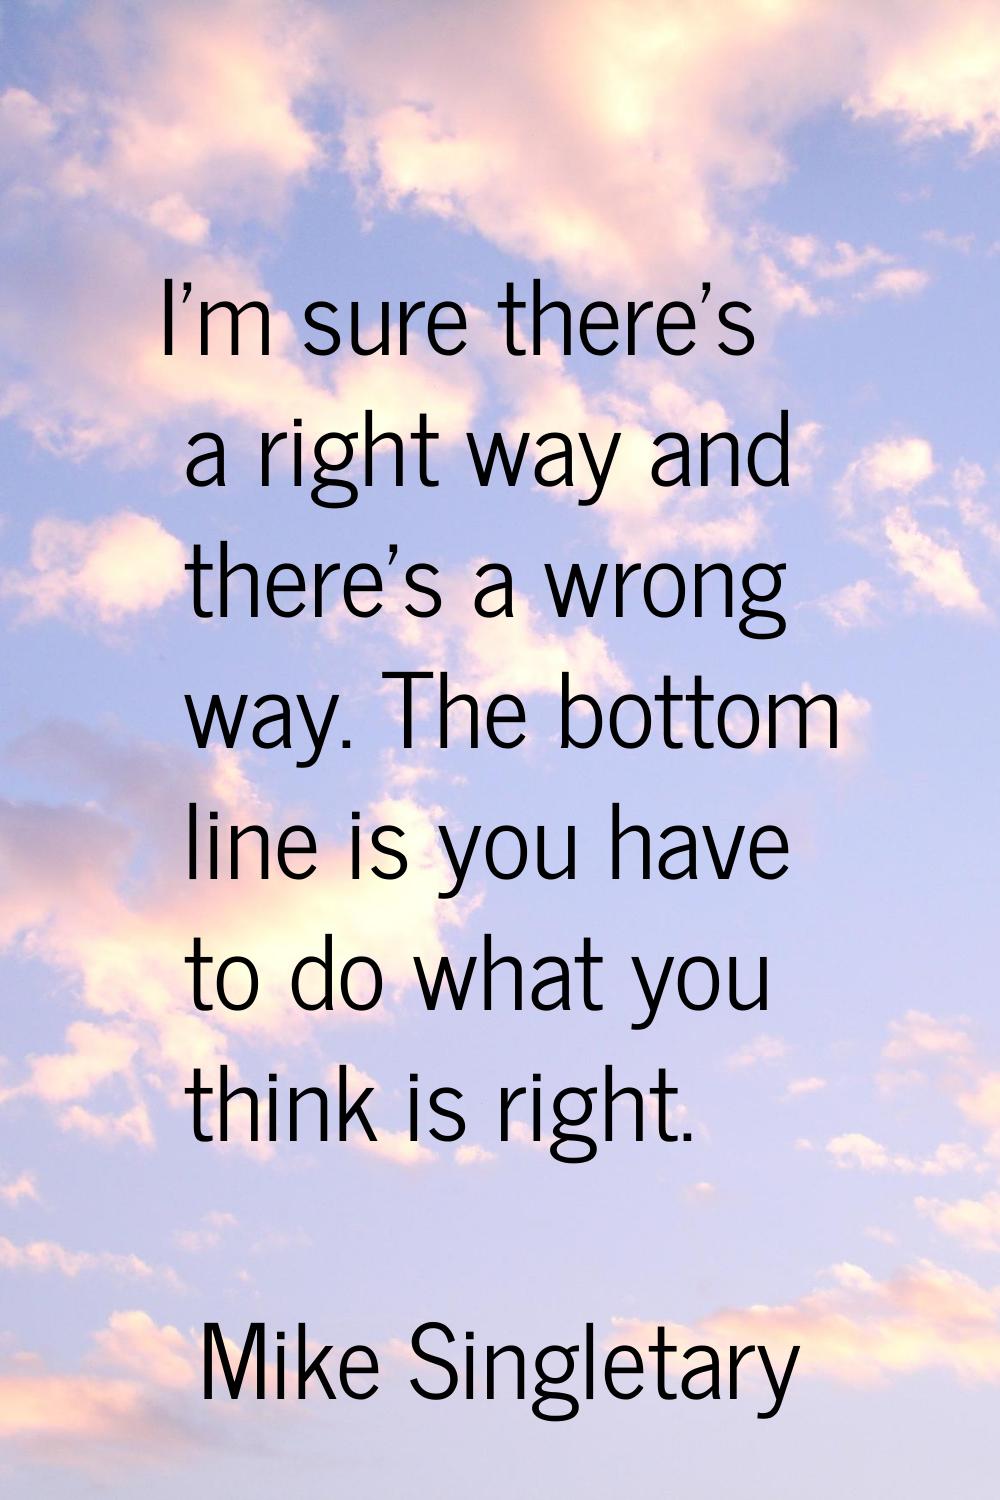 I'm sure there's a right way and there's a wrong way. The bottom line is you have to do what you th